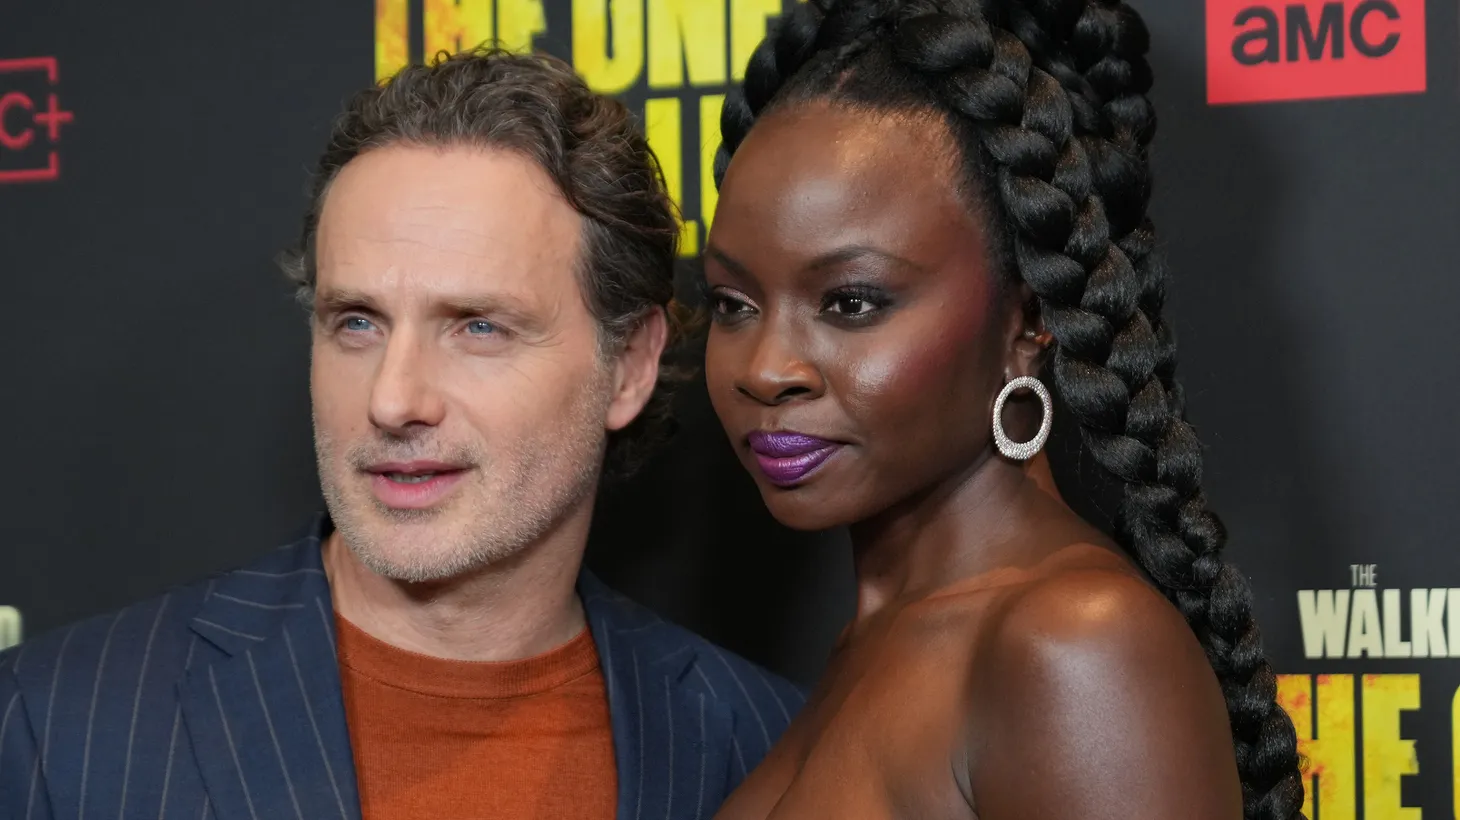 They live! Andrew Lincoln and Danai Gurira discuss reprising their breakout roles as Rick and Michonne Grimes on “The Walking Dead: The Ones Who Live.”